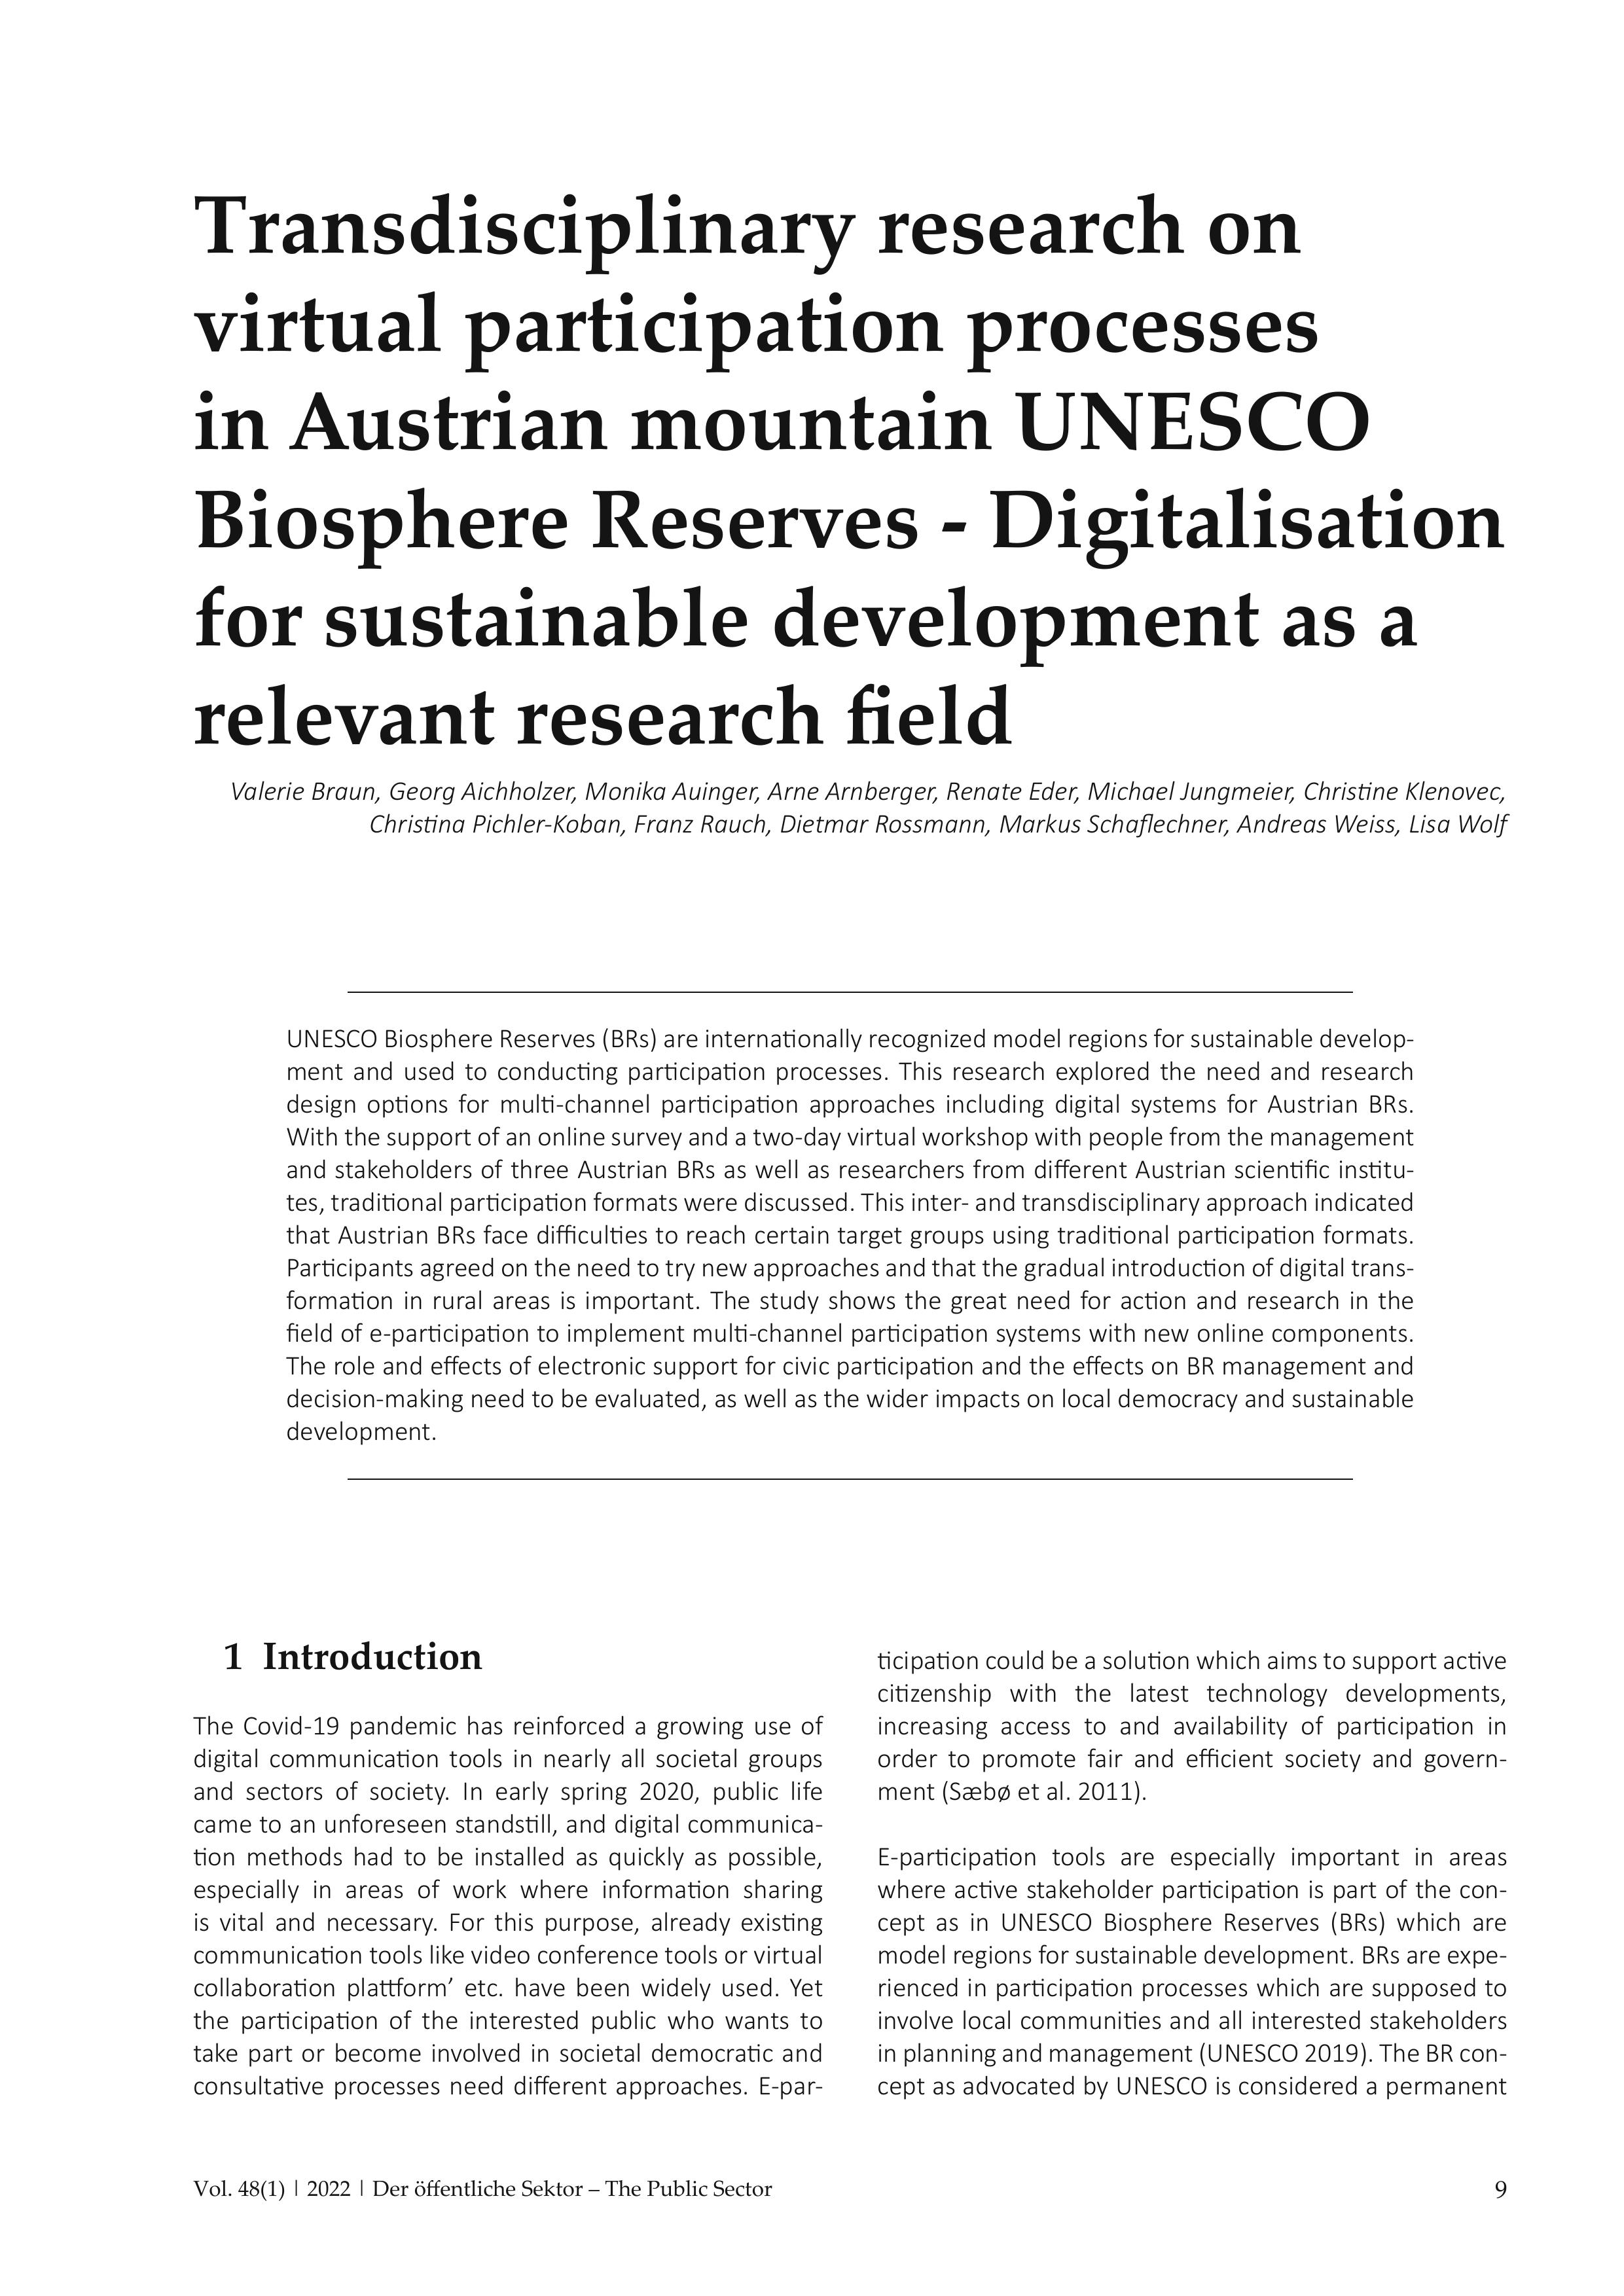 Transdisciplinary research on virtual participation processes in Austrian mountain UNESCO Biosphere Reserves - Digitalisation for sustainable development as a relevant research field